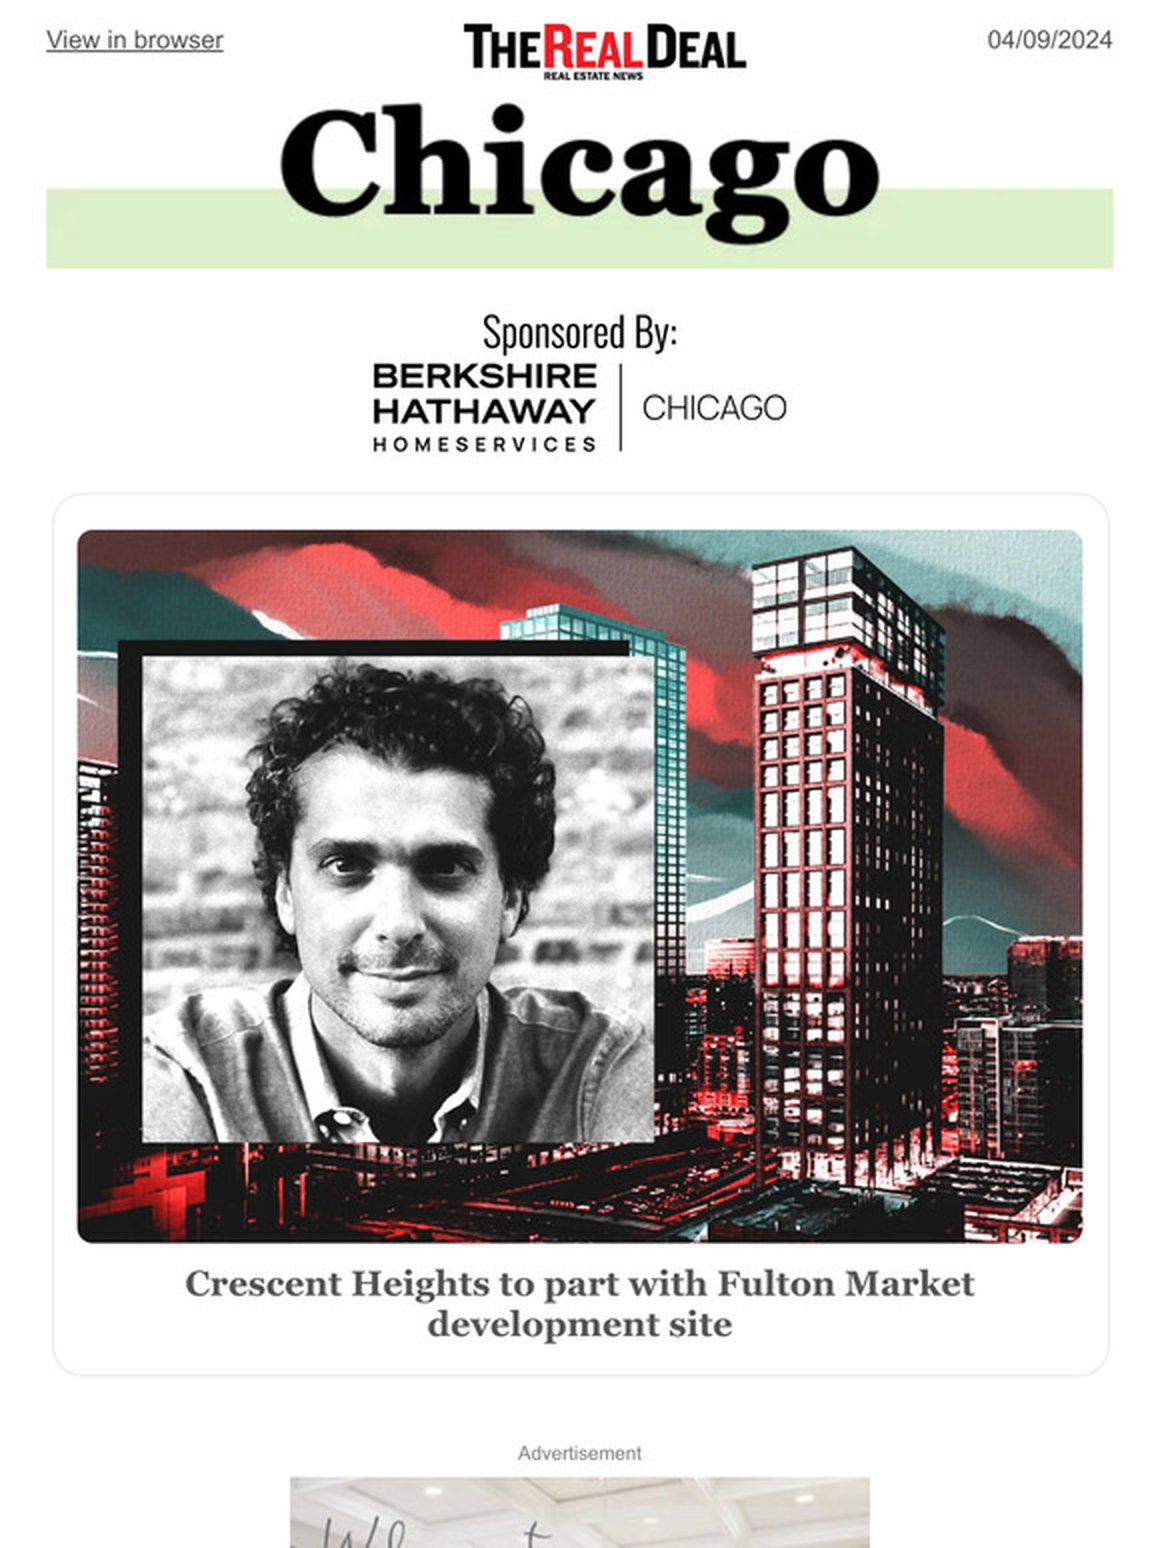 Crescent Heights looks to offload Fulton Market site; St. Regis condo trades for a loss… and more